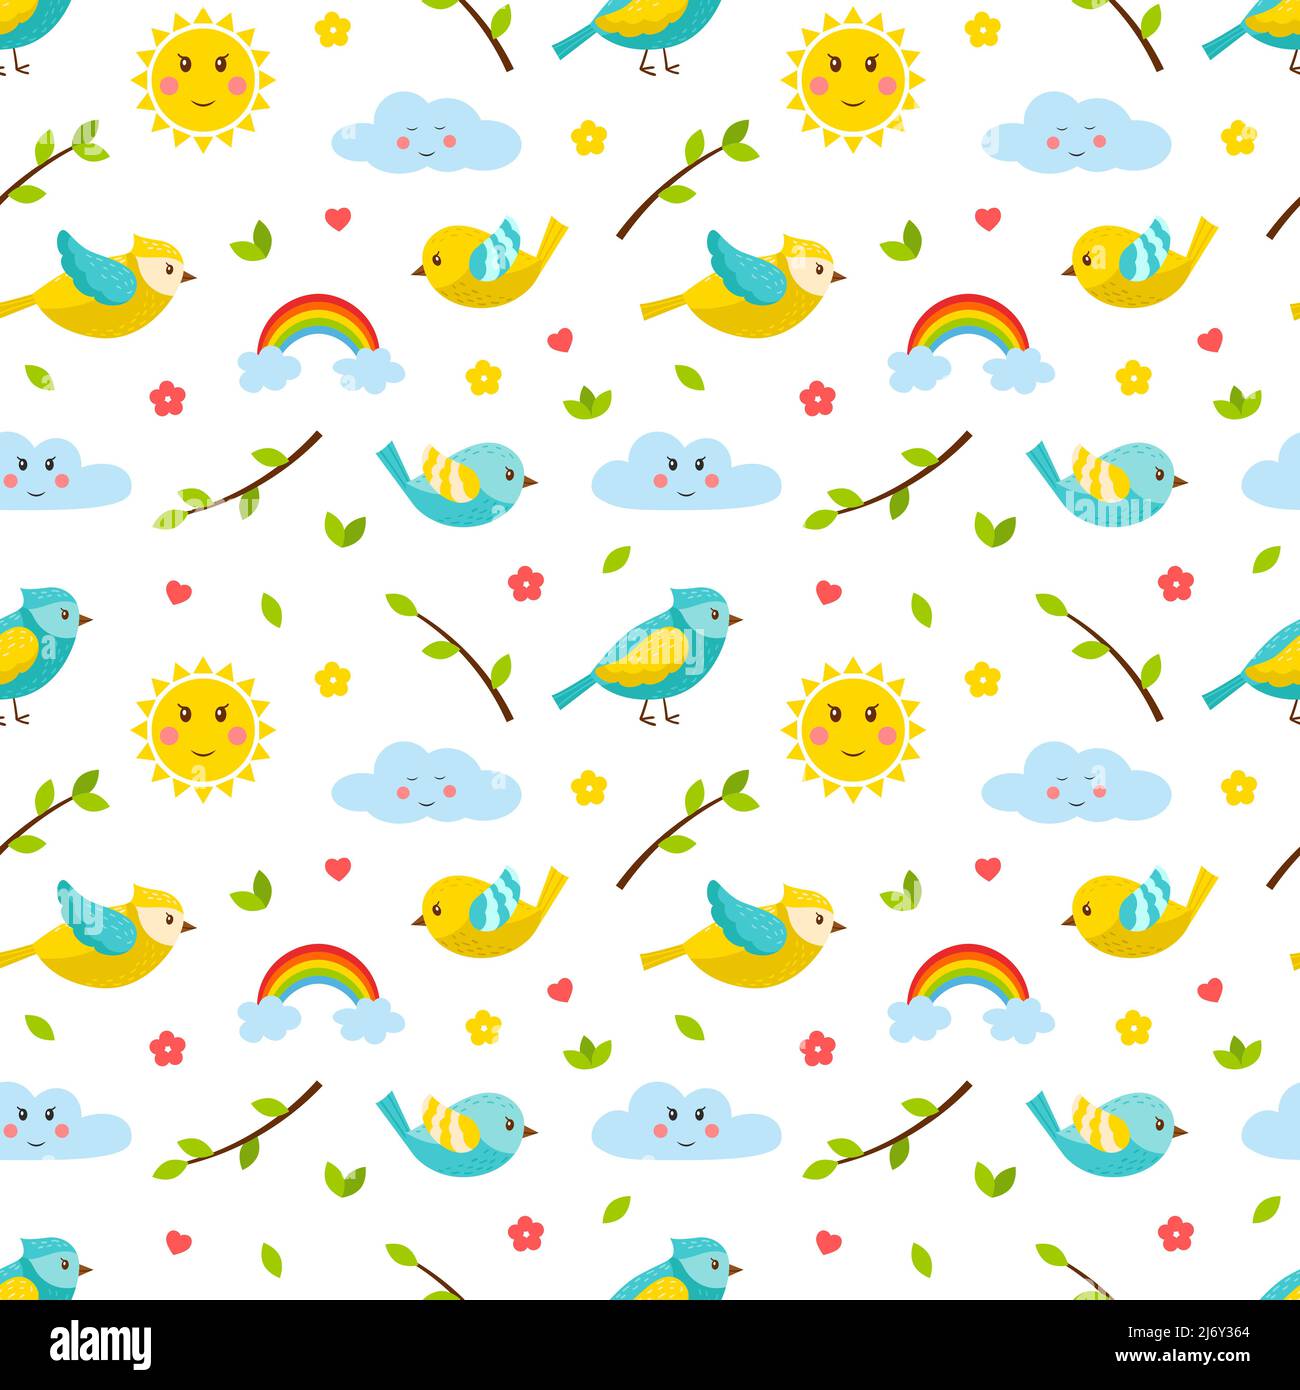 Seamless pattern with birds, twigs, rainbows, sun and cloud. Cute cartoon spring, summer flat vector elements. Children's pattern for textiles and pac Stock Vector